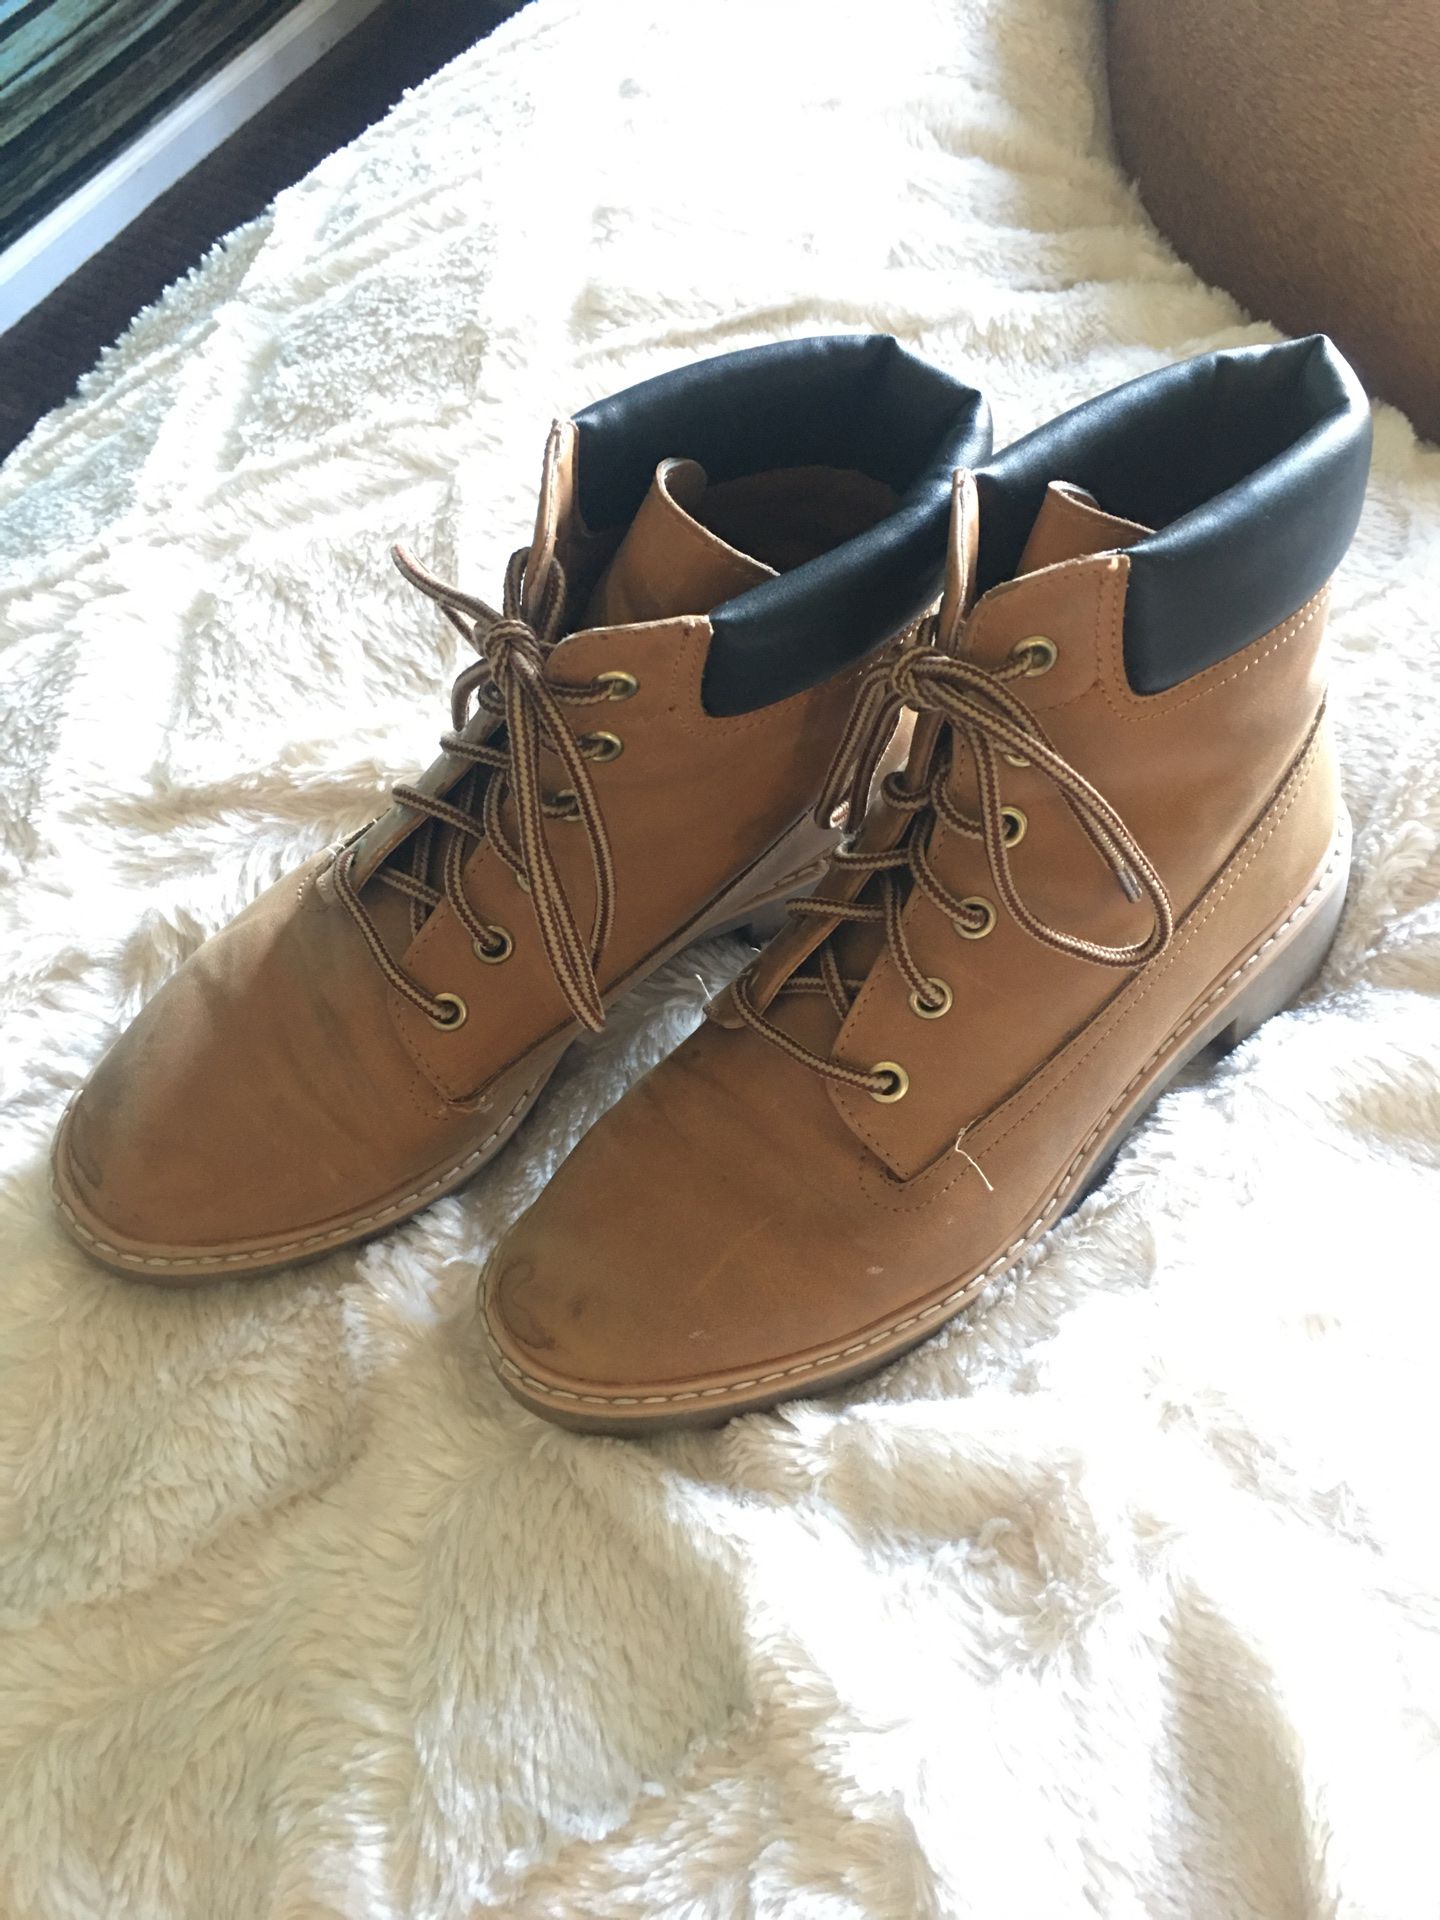 Fashion lace up Work Boots